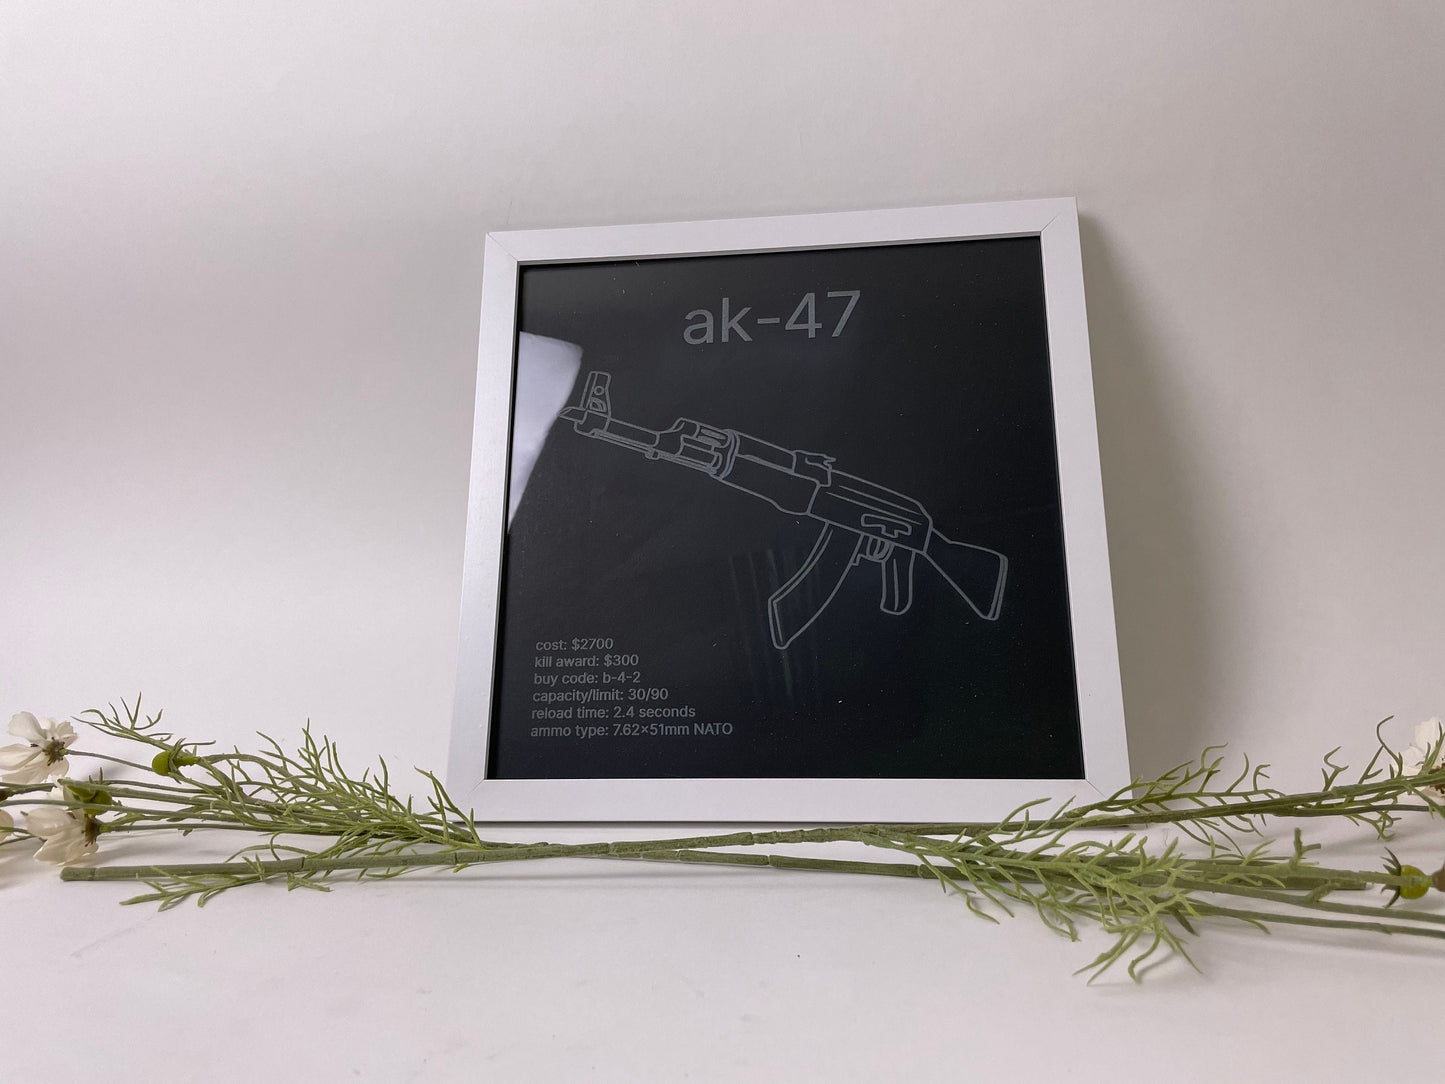 Counter-Strike Armory Weapons Cache, AK-47, Framed Etched Glass Wall Decor